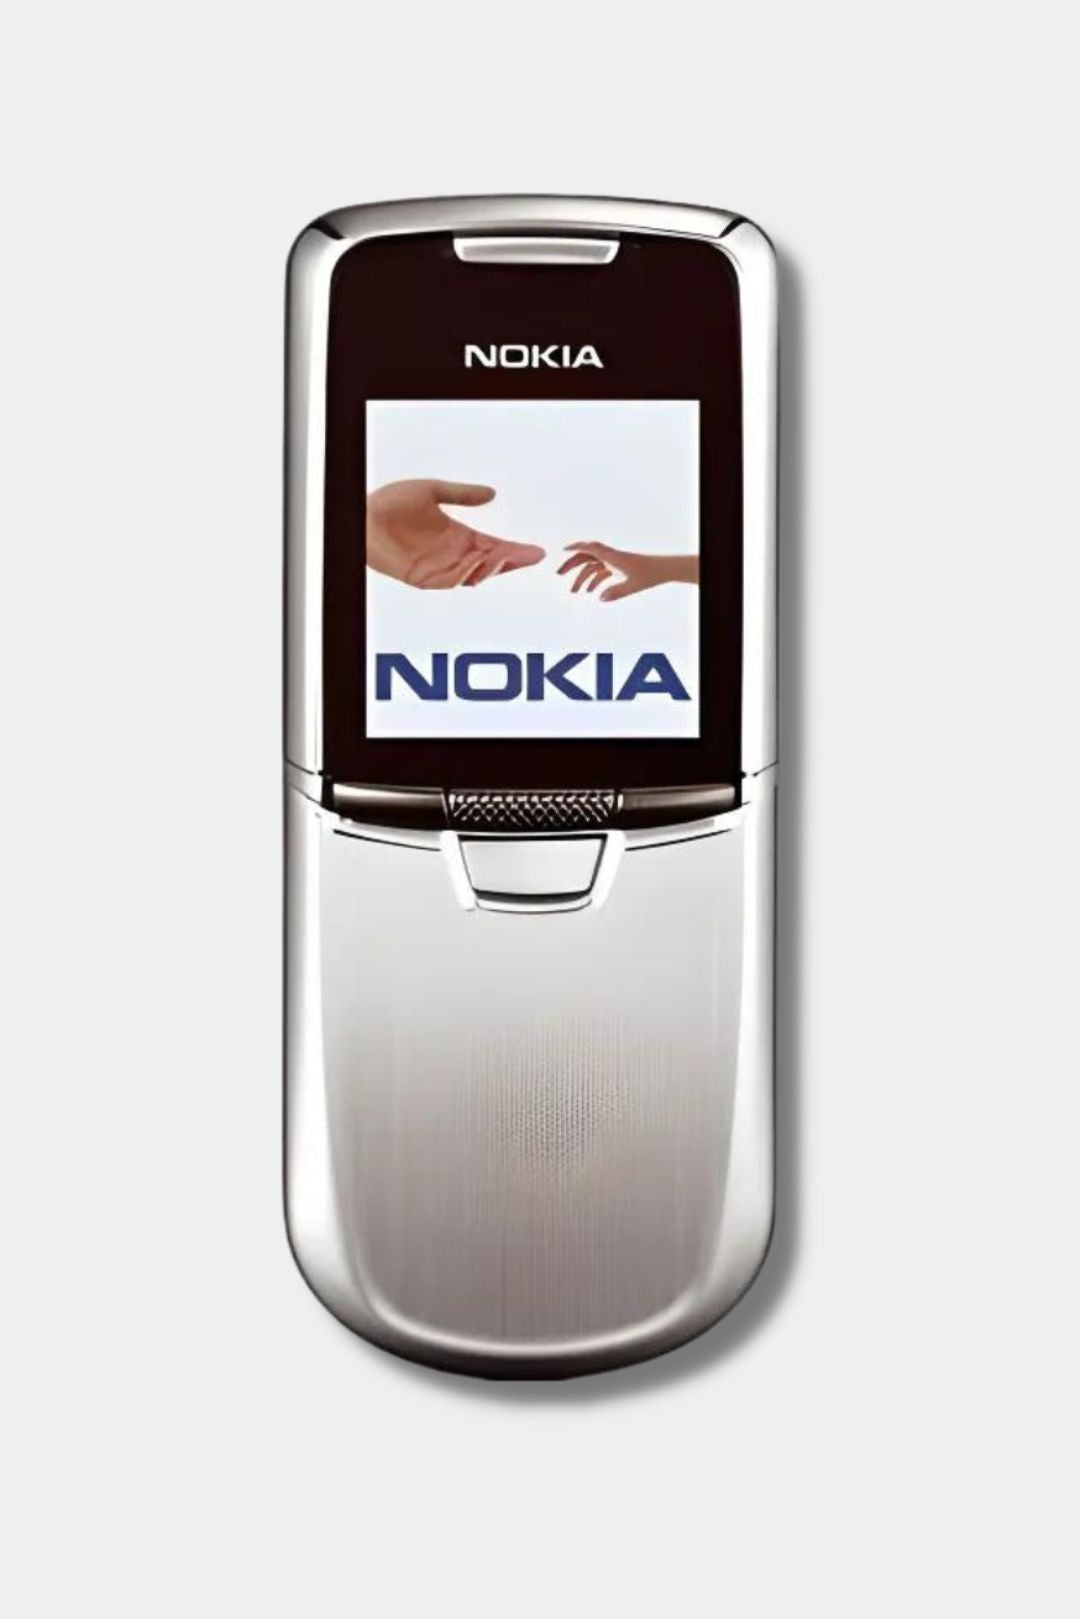 Nokia 8800 Silver: was the symbol of exclusivity and luxury